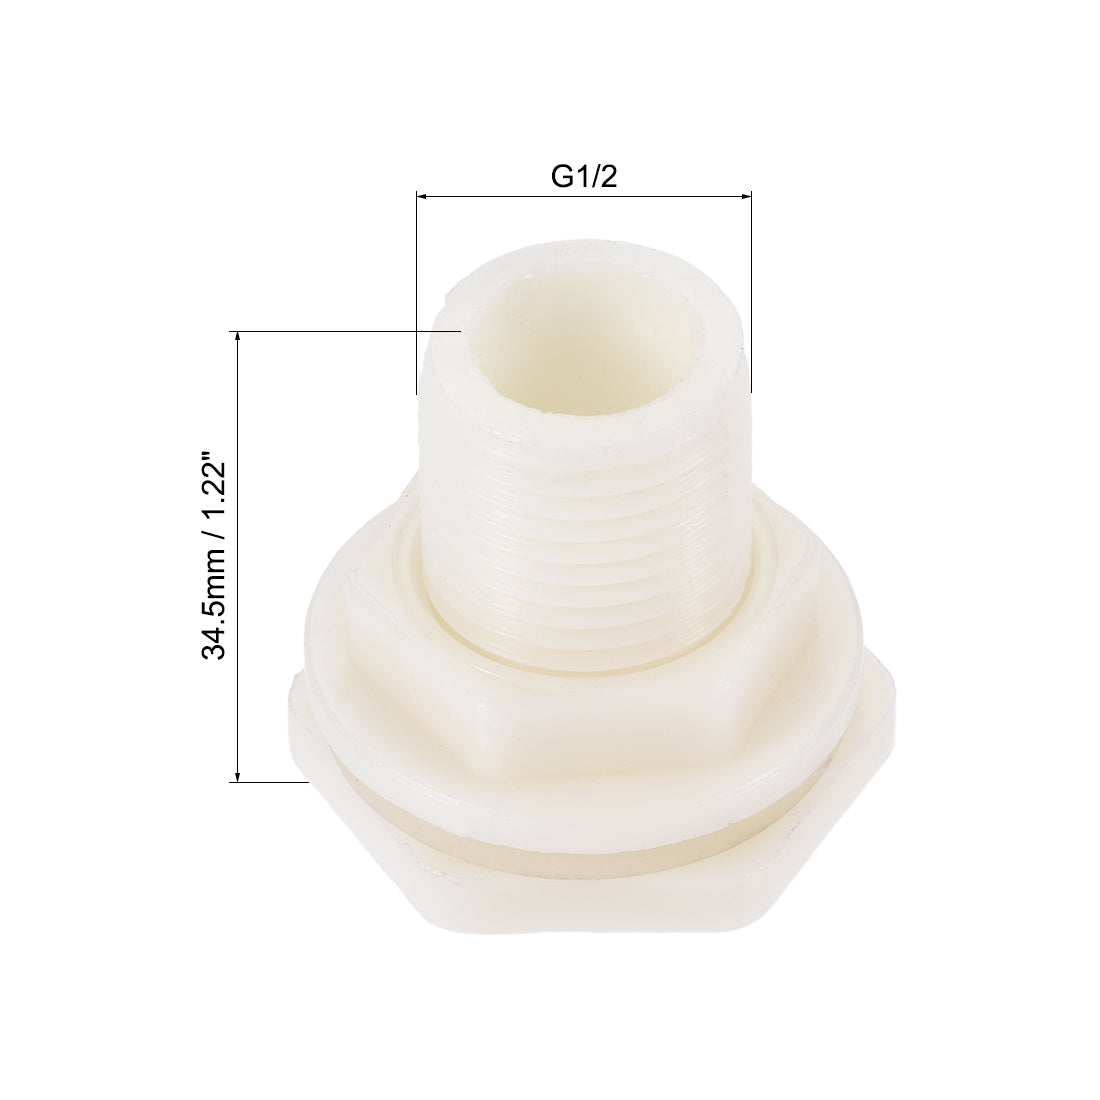 Uxcell Uxcell Bulkhead Fitting, G3/4 Male, Tube Adaptor Pipe Fitting with Silicone Gasket, for Water Tanks, ABS Plastic, White